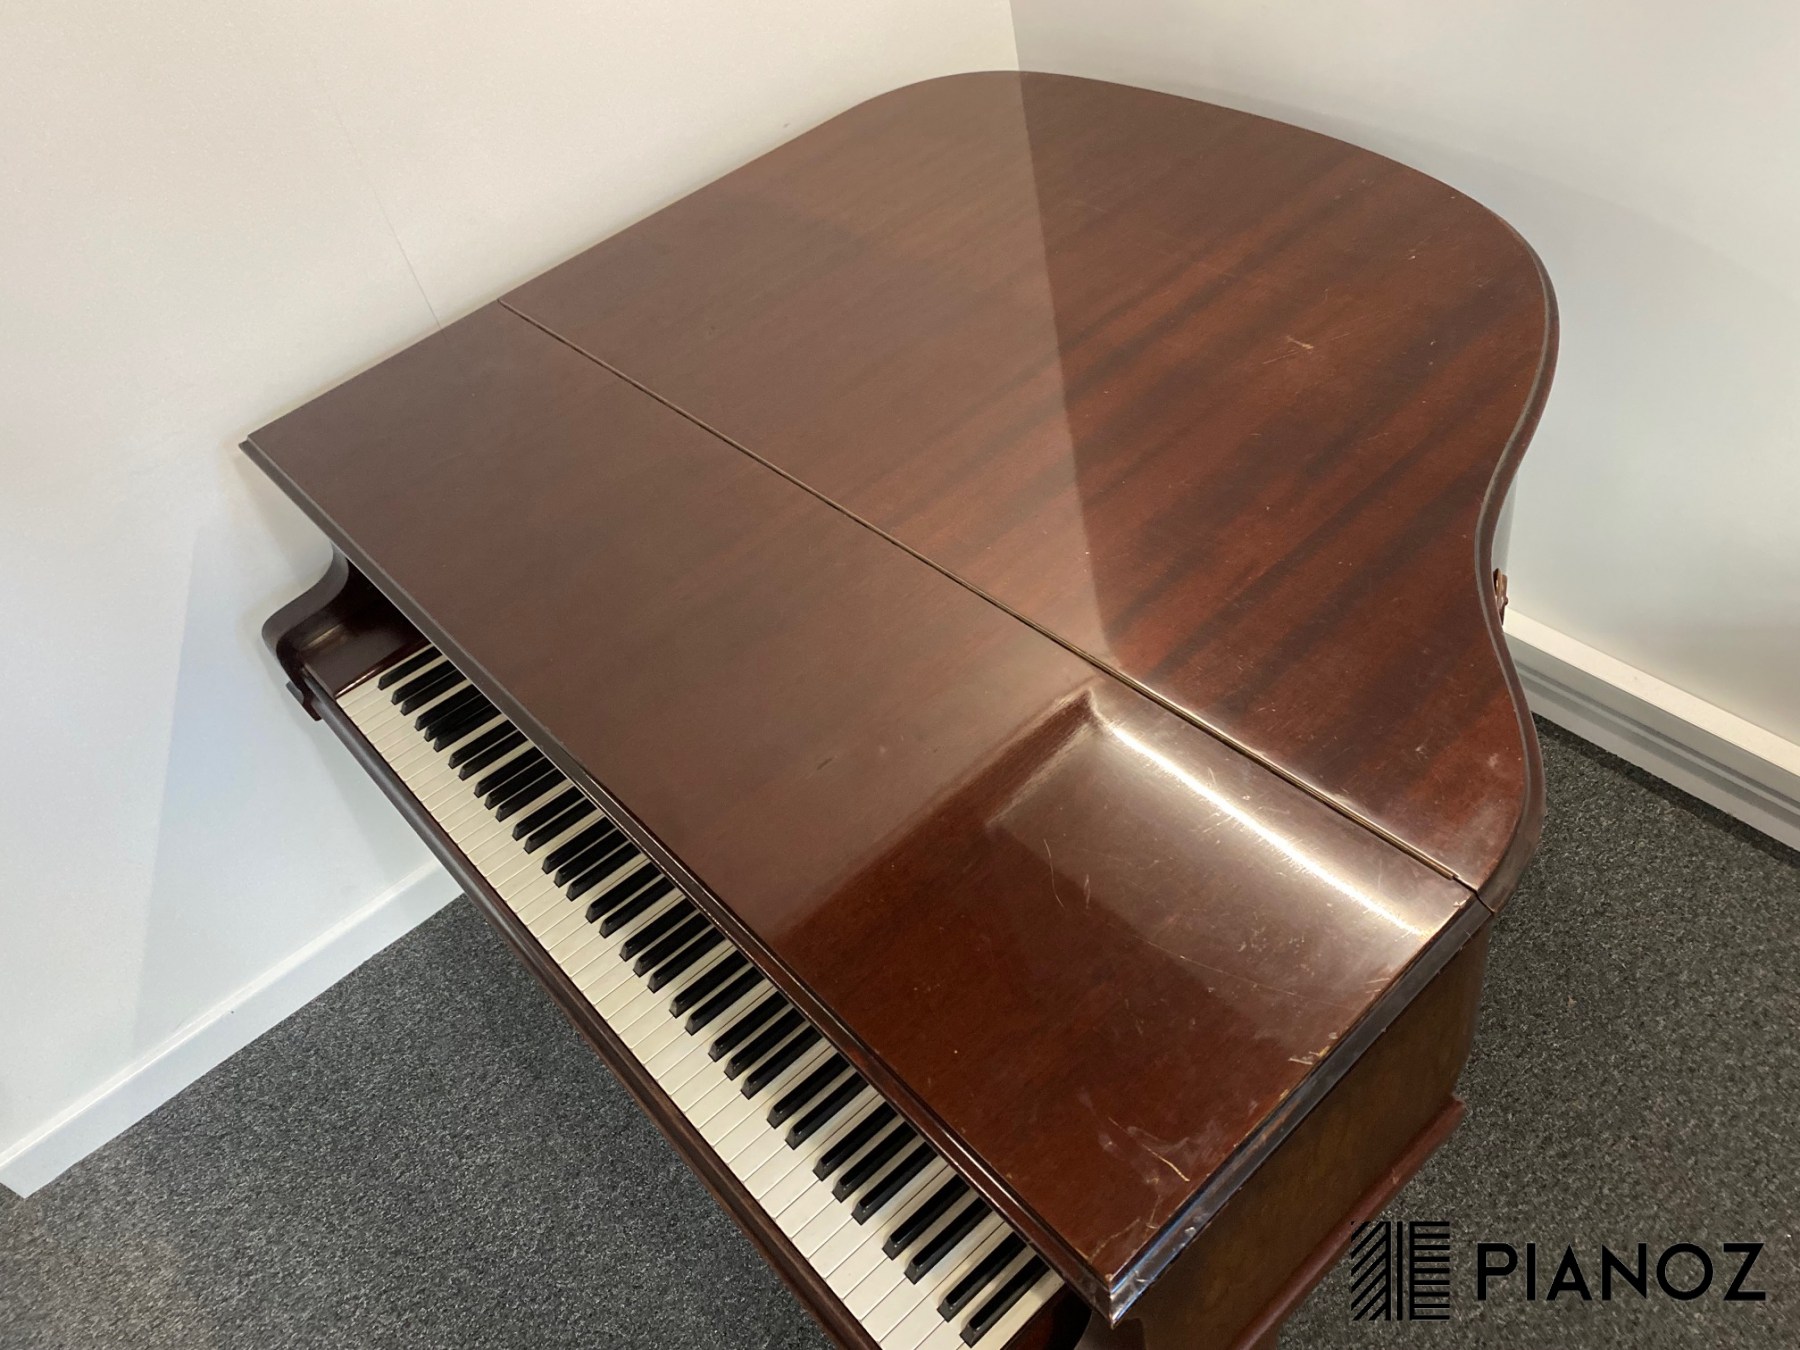 August Förster Refurbished Baby Grand Piano piano for sale in UK